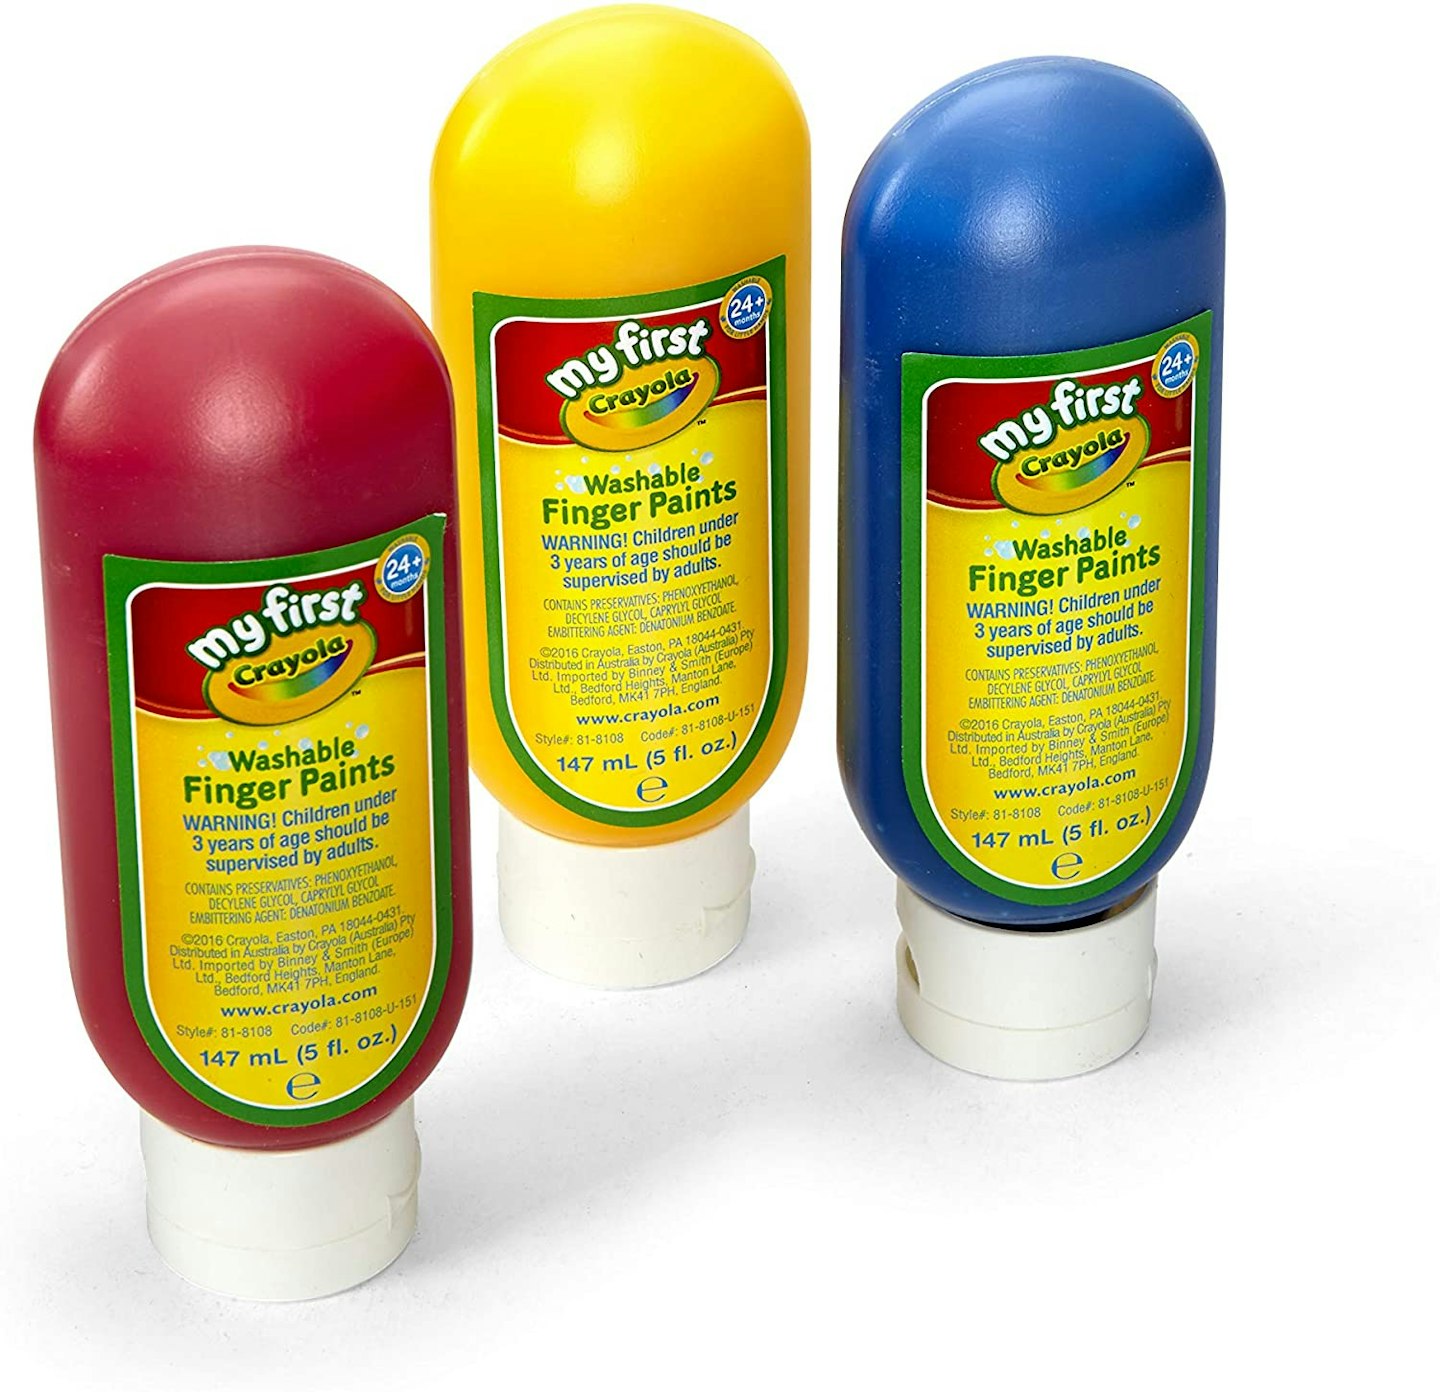 My First Crayola Kids Washable Finger Paint